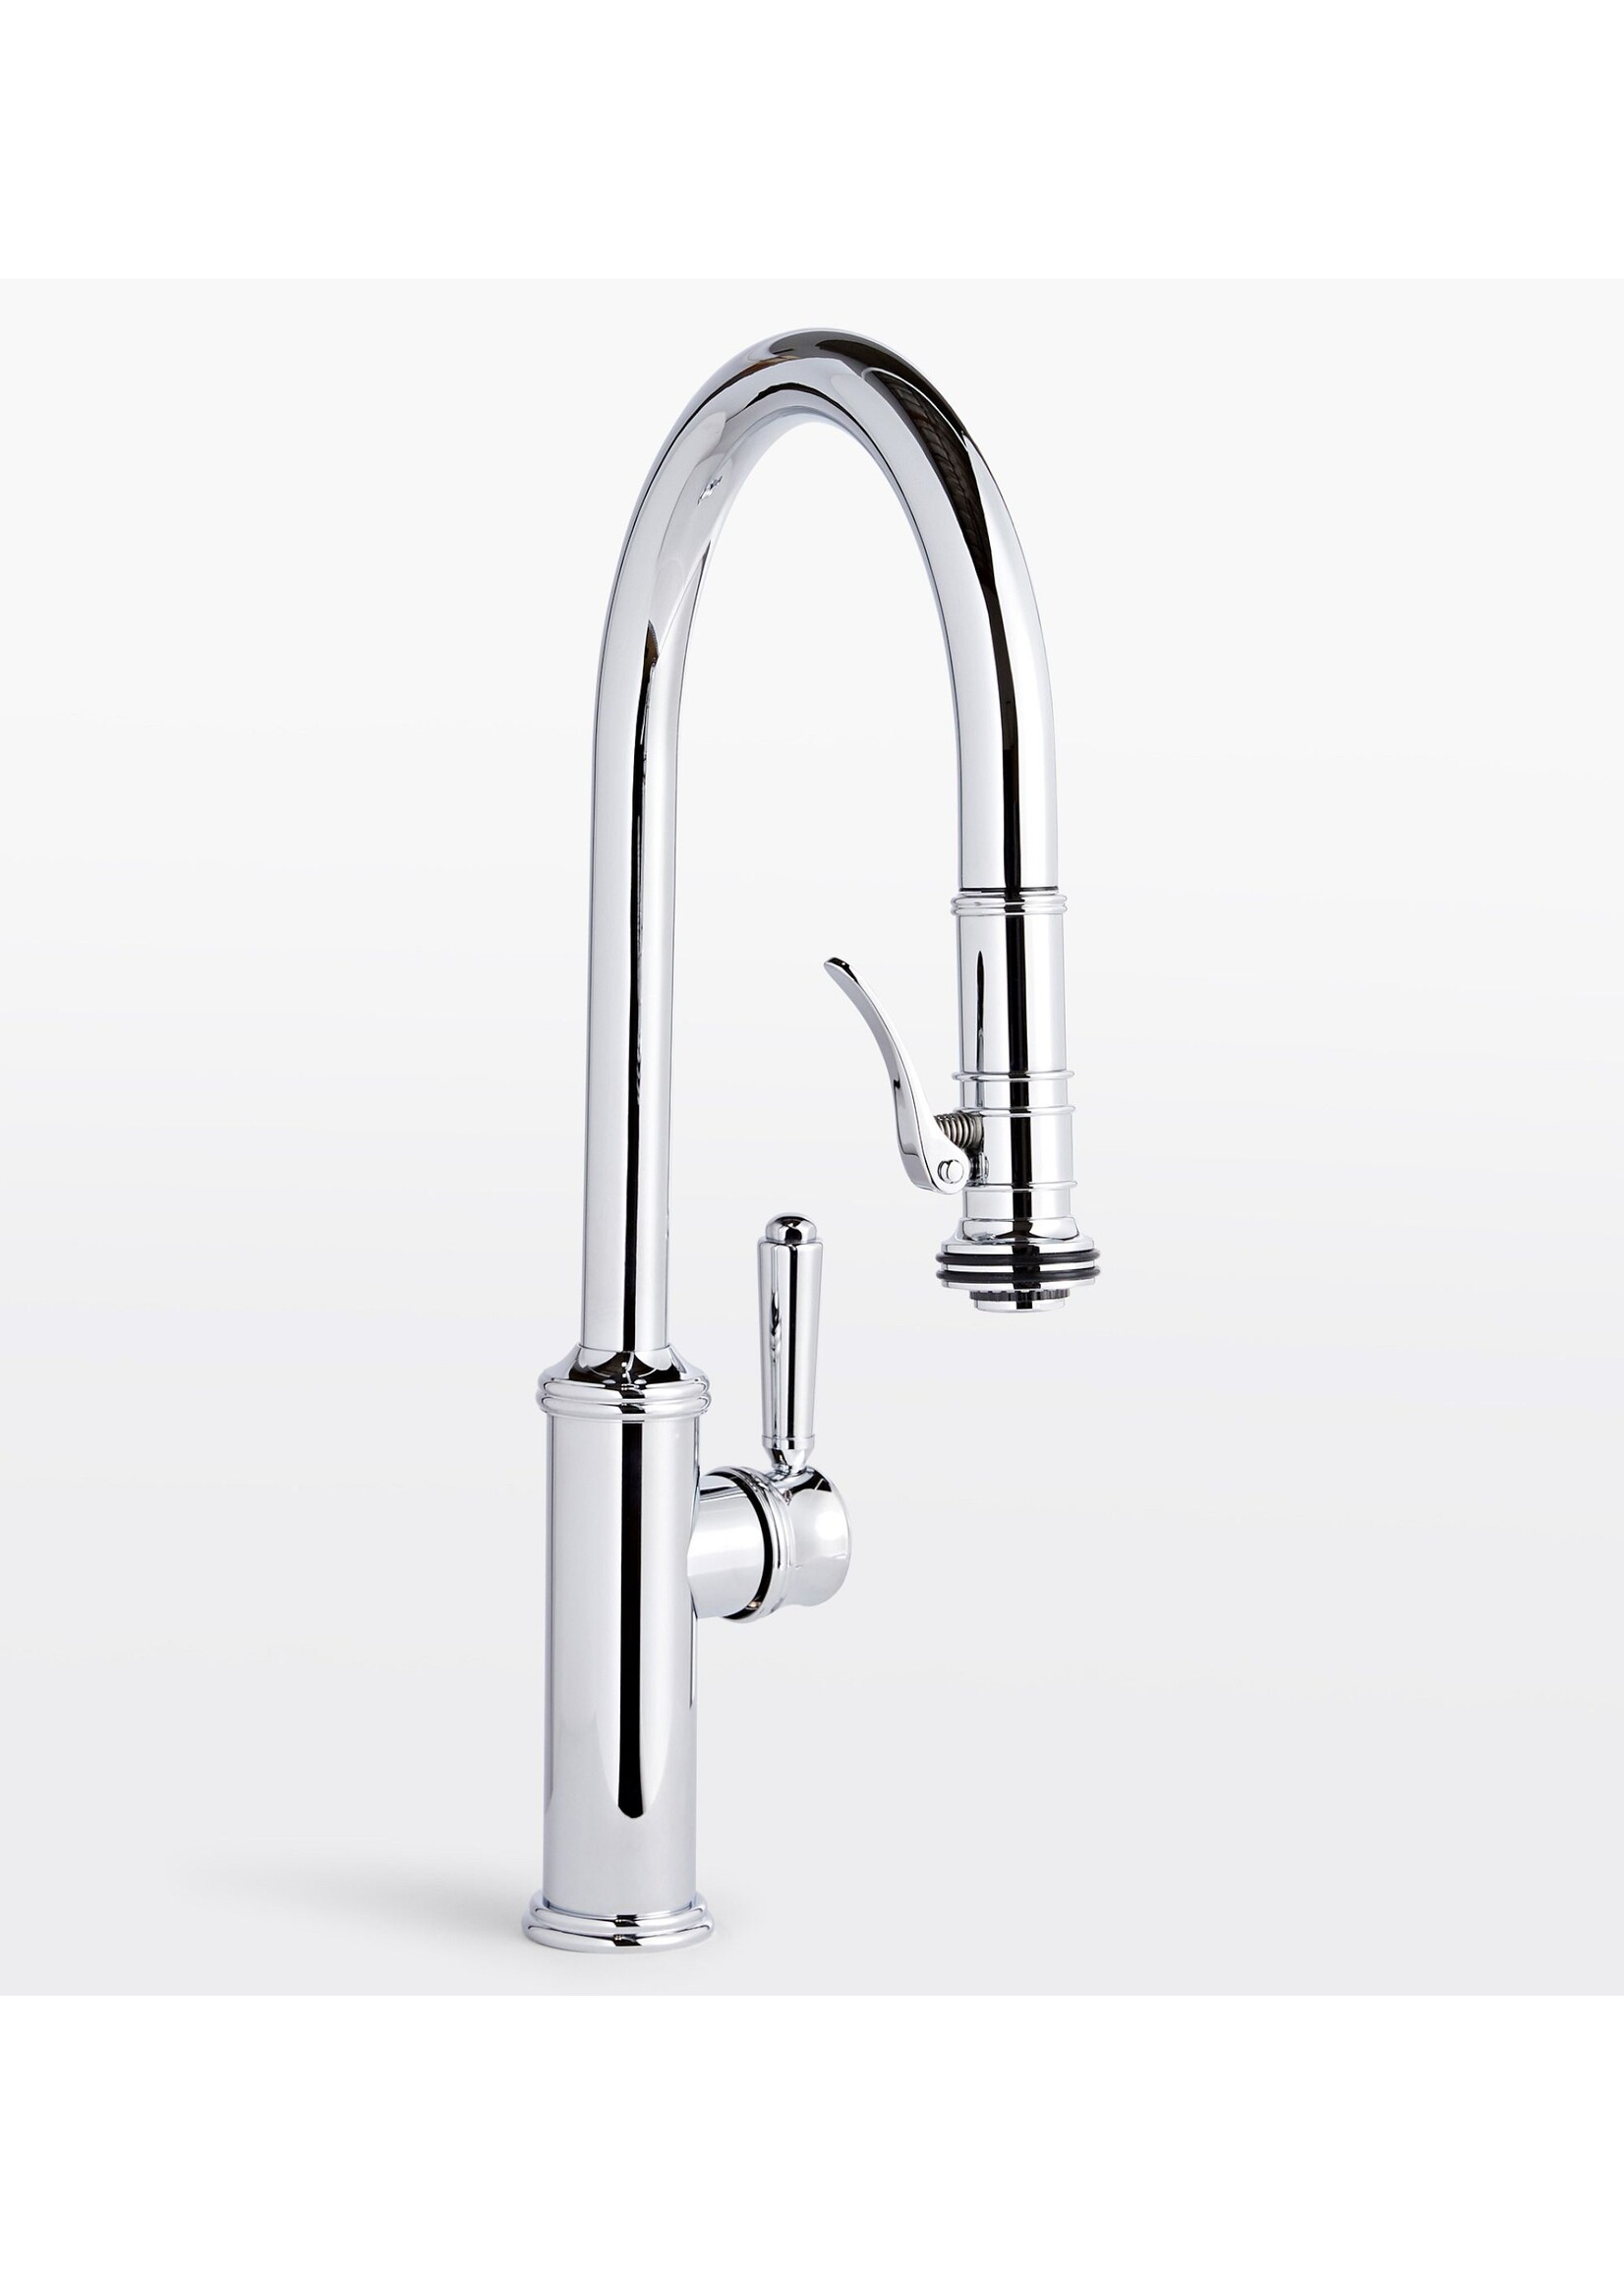 California Faucets California Faucets Davoli pull down kitchen faucet 18" High Arc Spout w/ Squeeze sprayer Custom hdl